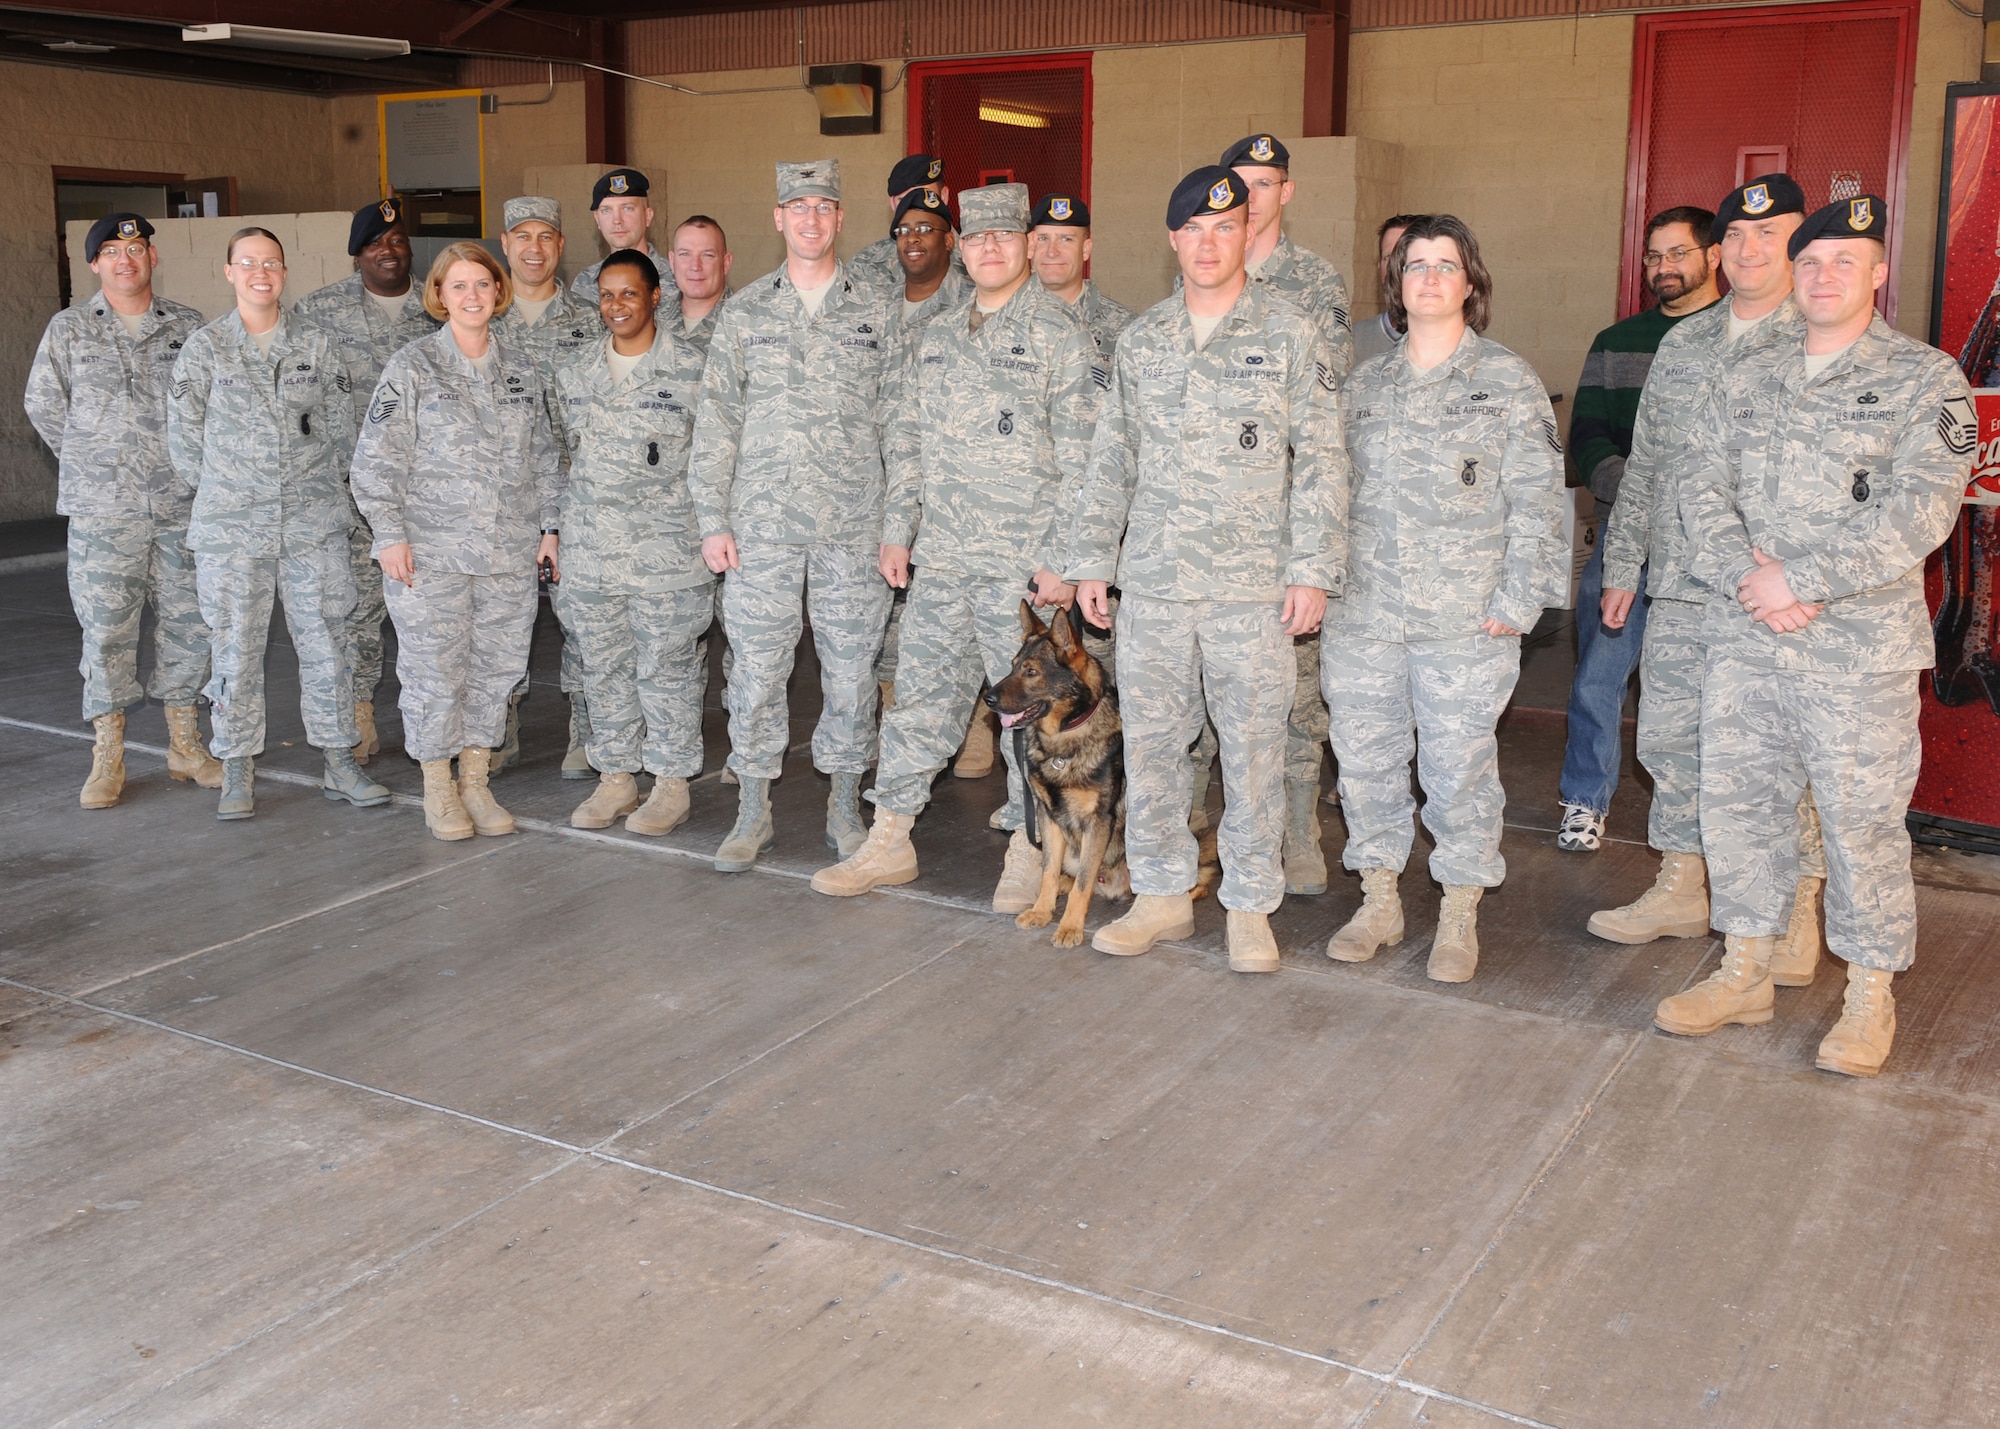 Staff Sgt. Noe Gutierrez, 49th Security Forces Squadron and his military working dog, Bill, pose for a group photo with Col. Stephen DiFonzo, 49th Mission Support Group commander and other members of the 49 SFS on his return to Holloman Air Force Base, N.M., Feb. 9. Sergeant Gutierrez returned from a 179-day deployment. (U.S. Air Force photo/Senior Airman Michael Means)